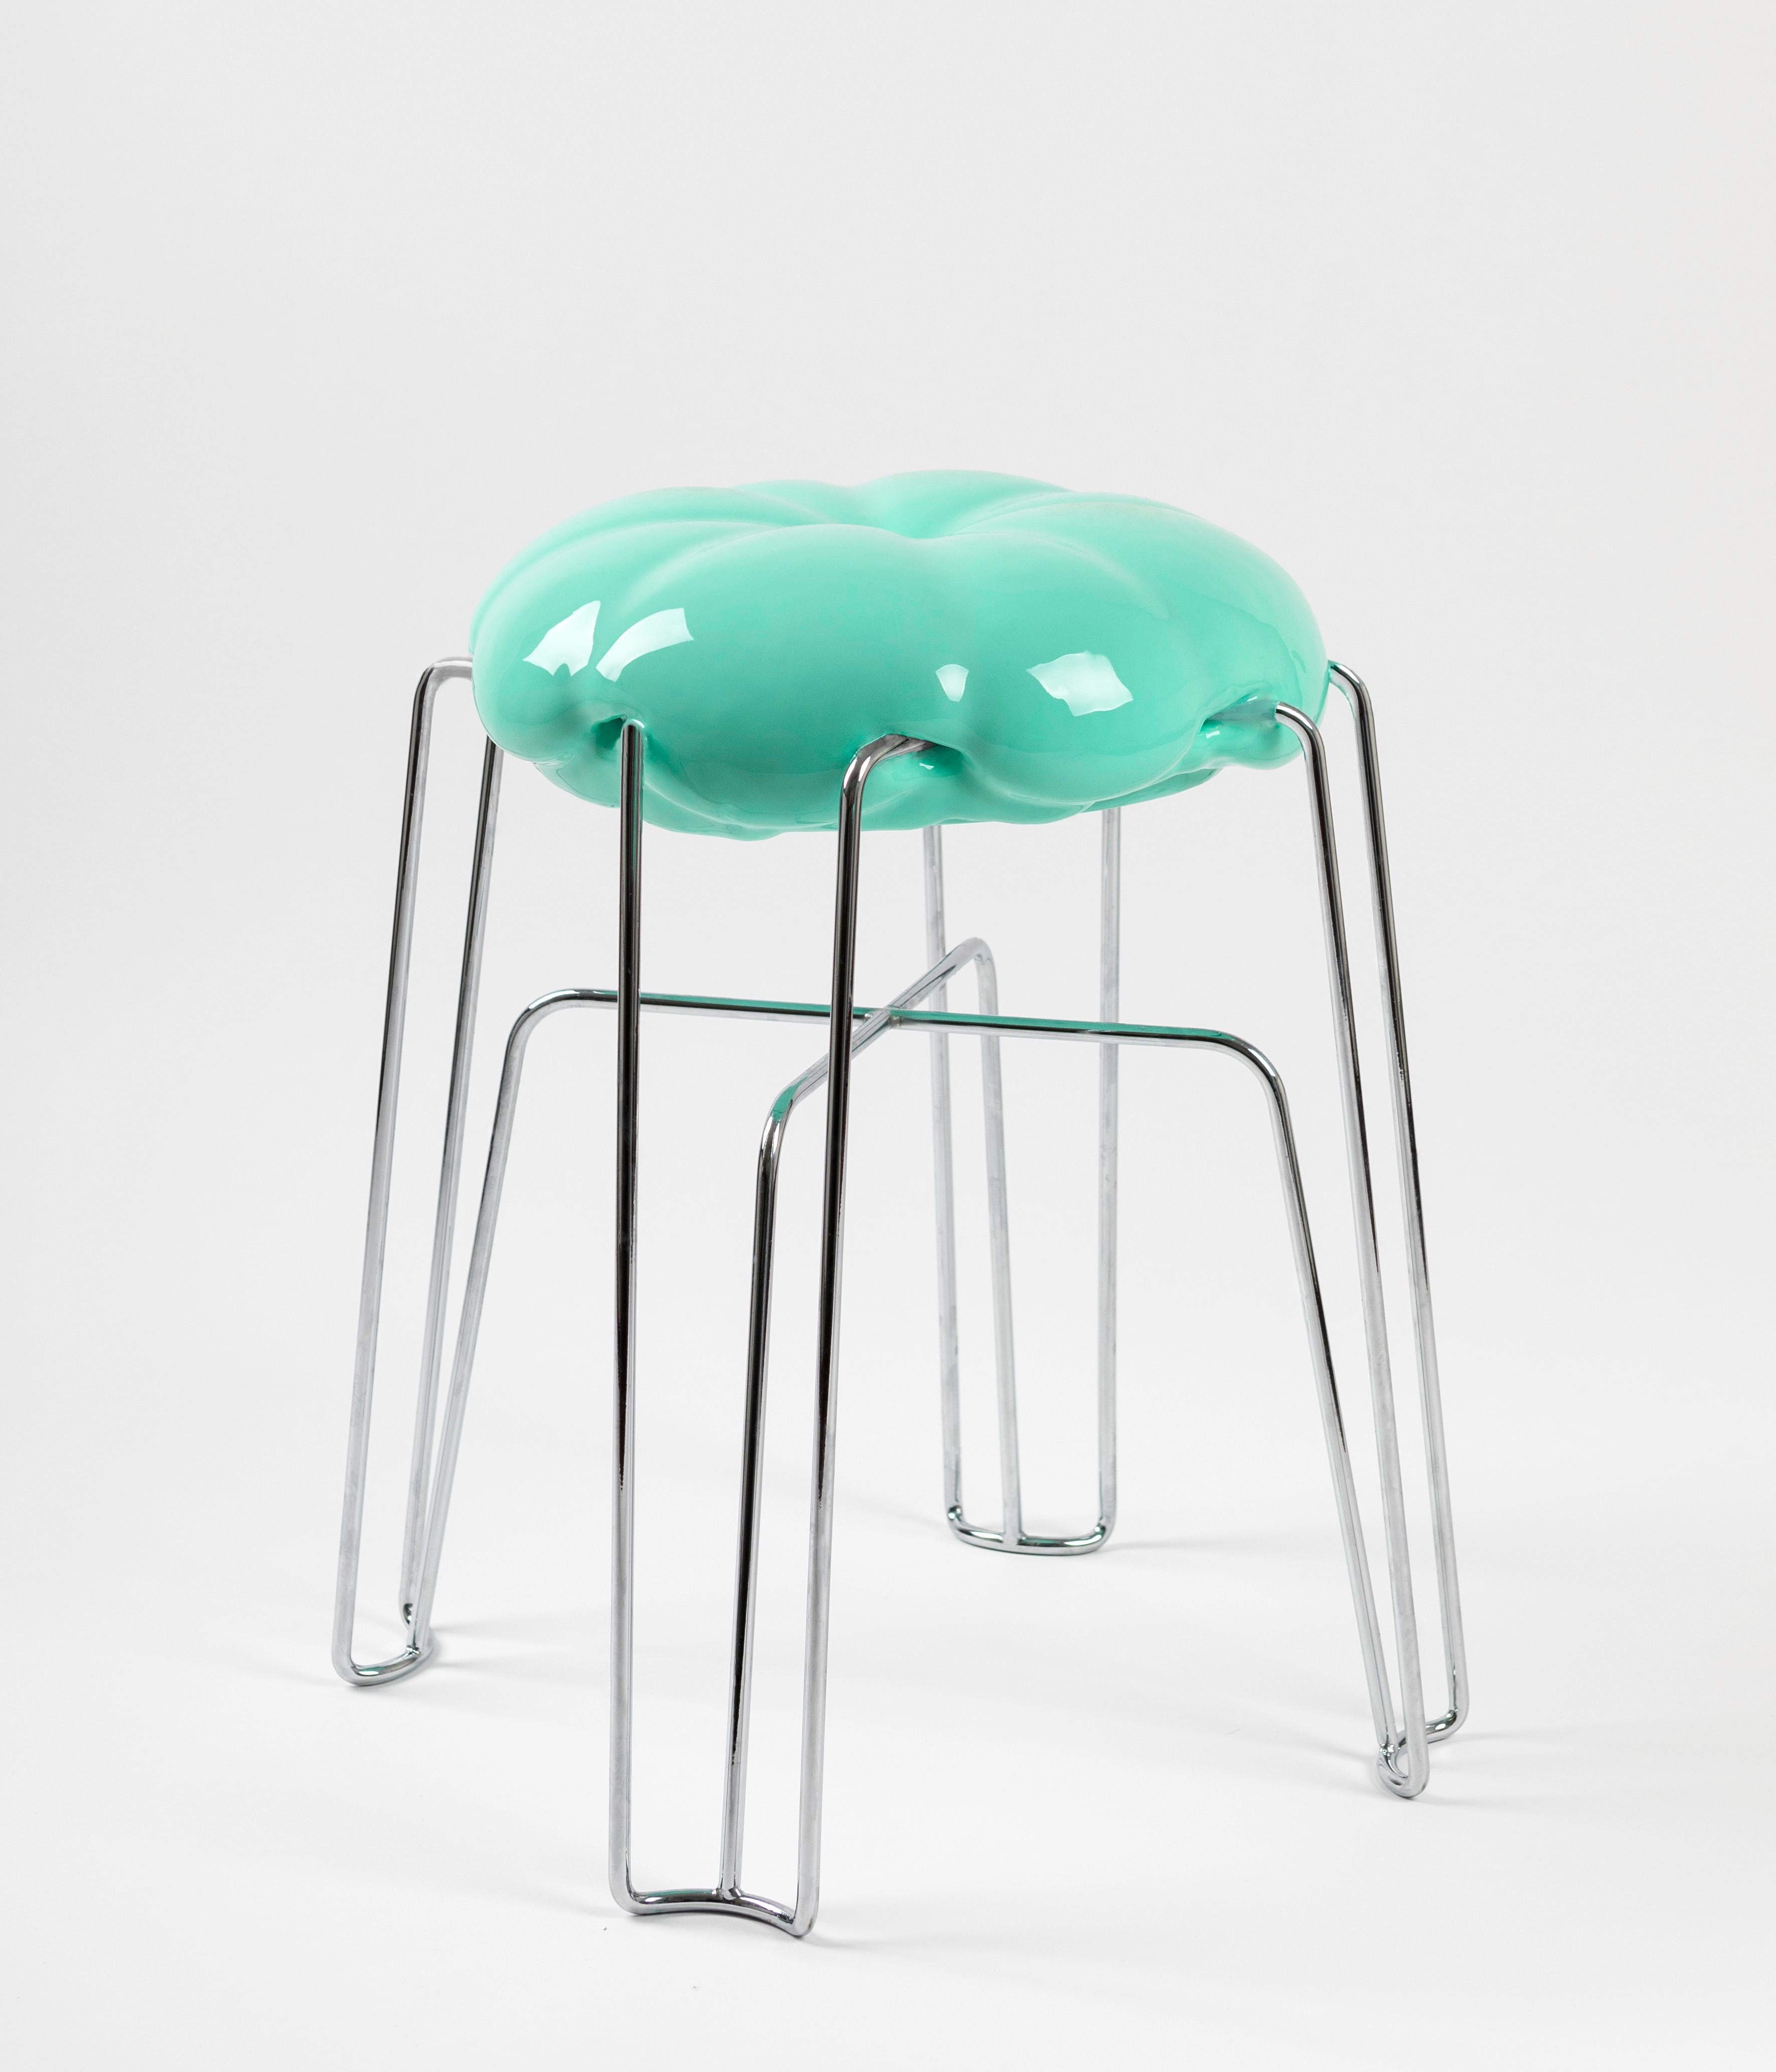 Marshmallow Stool by Paul Ketz in Yeti Glue Polyurethane Foam and Steel In Excellent Condition For Sale In New York, NY